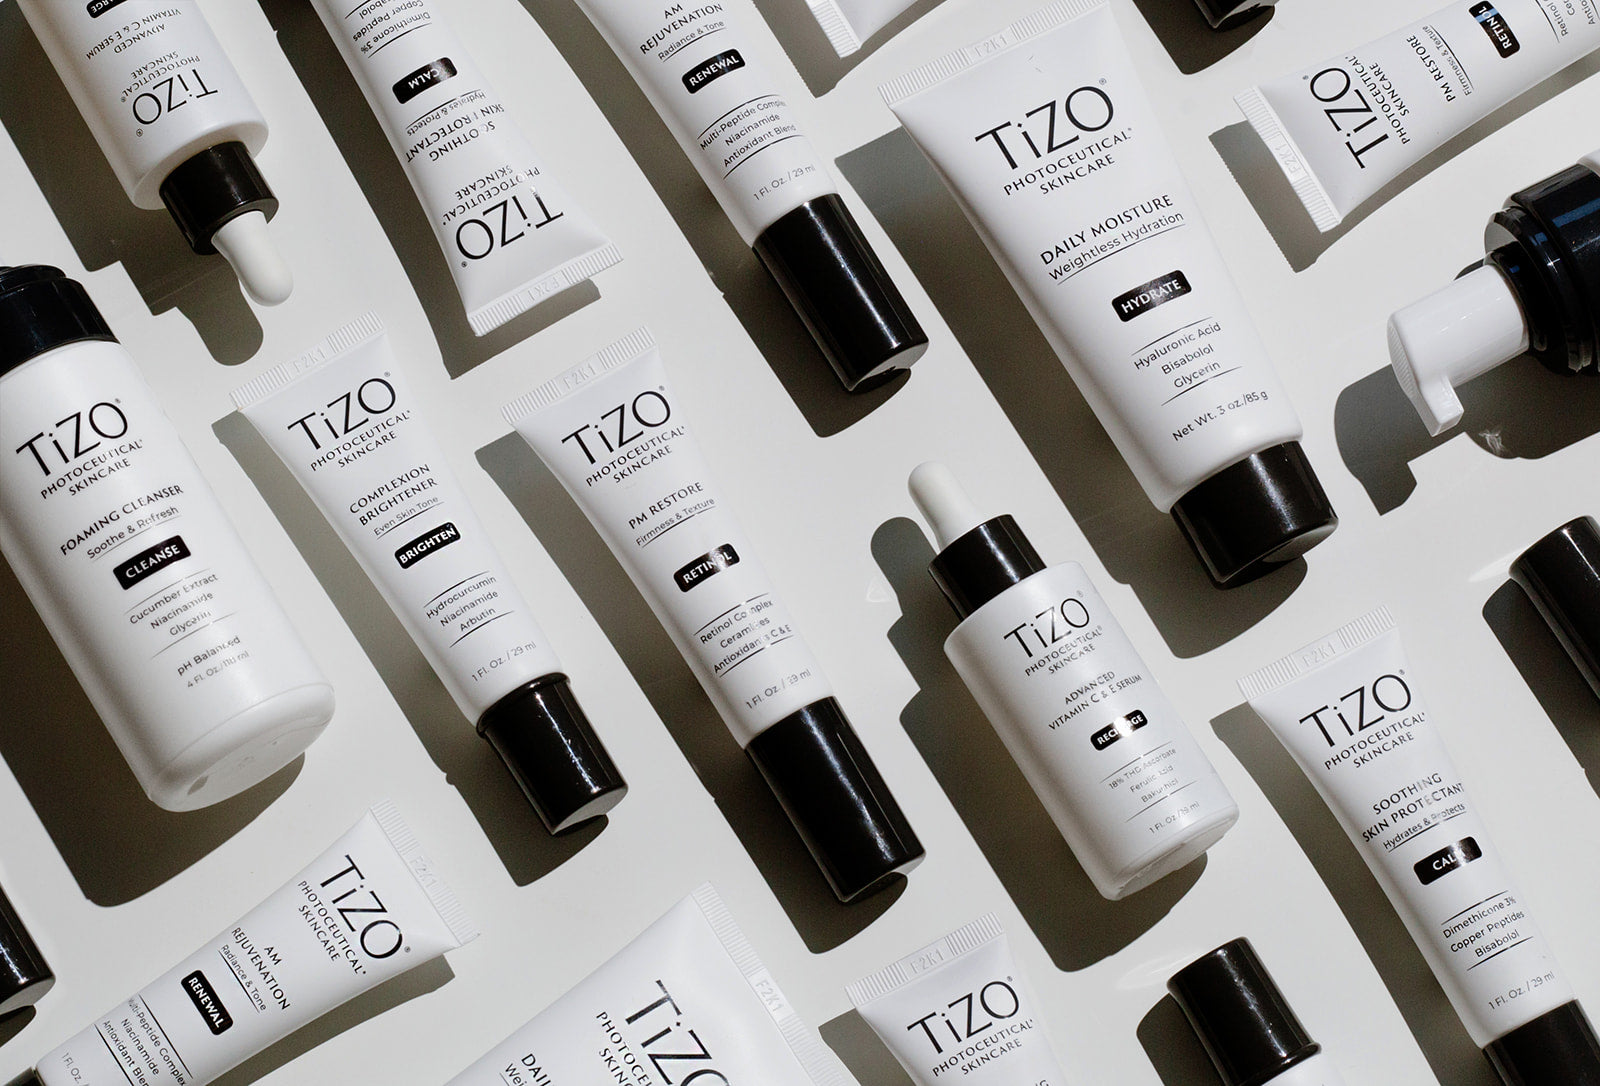 TiZO photoceutical skincare products lay in a pattern